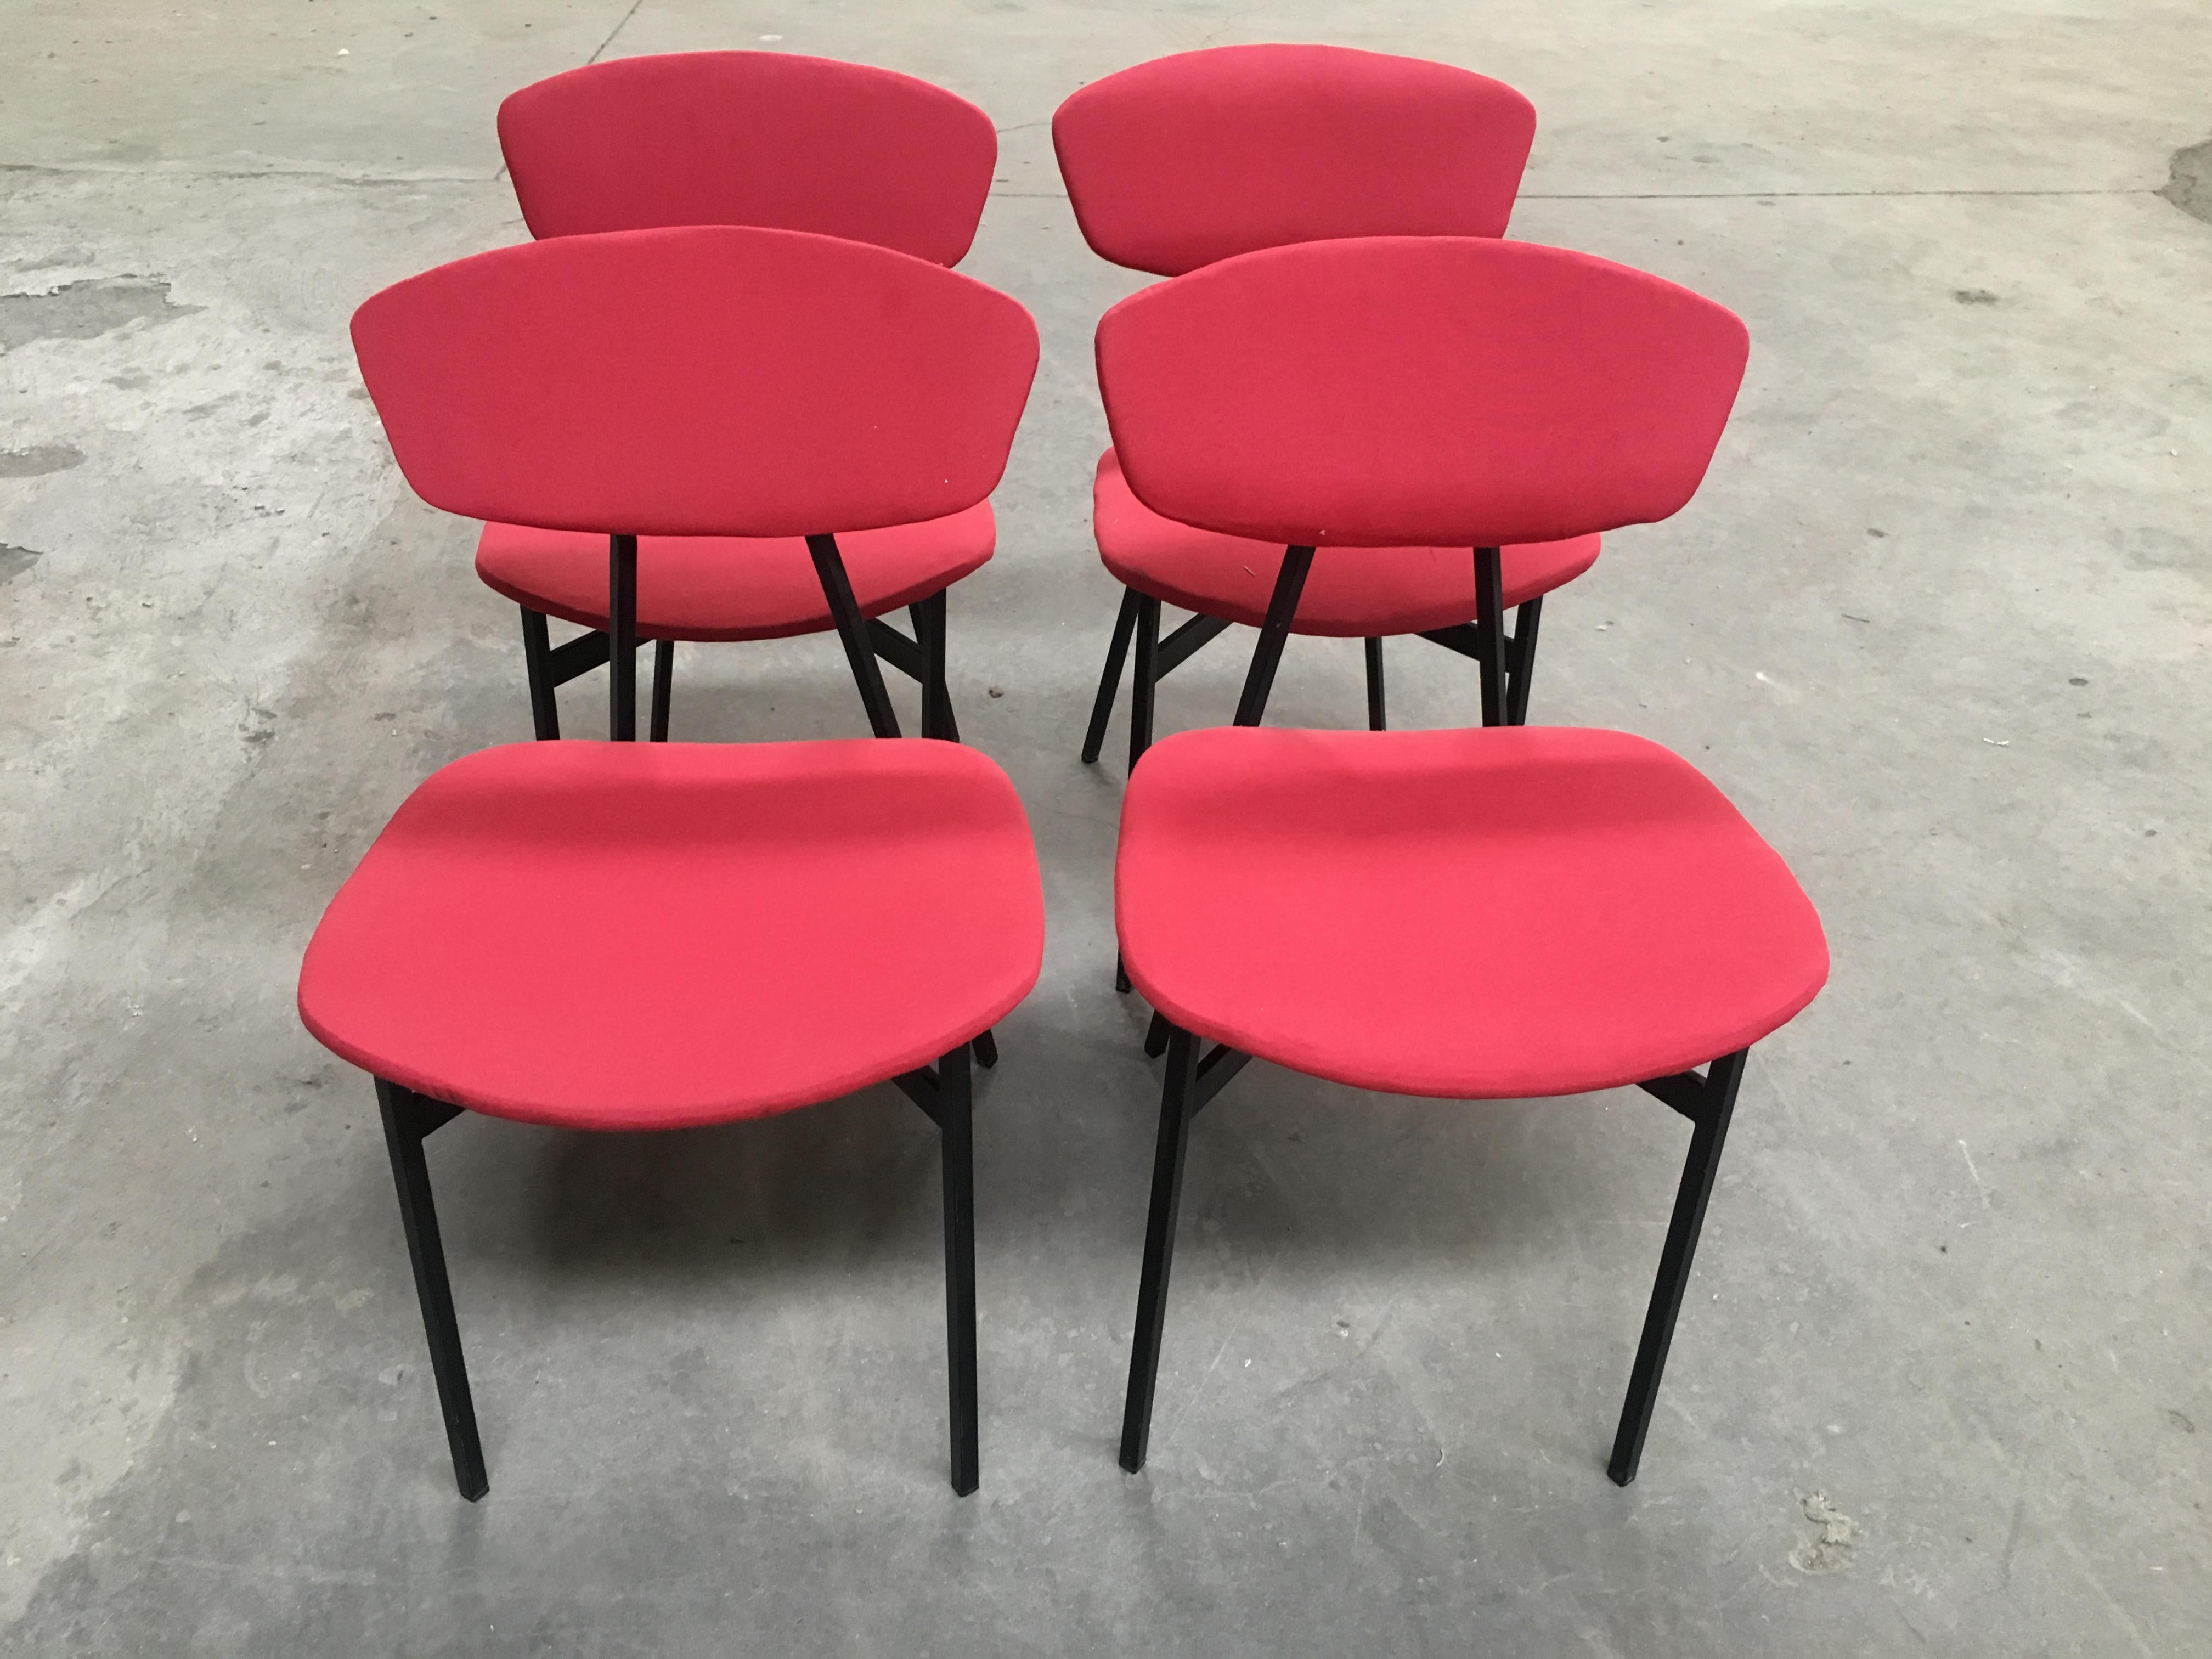 Mid-Century Modern Italian set of four dining or desk black iron chairs with original red upholstery, 1960s.